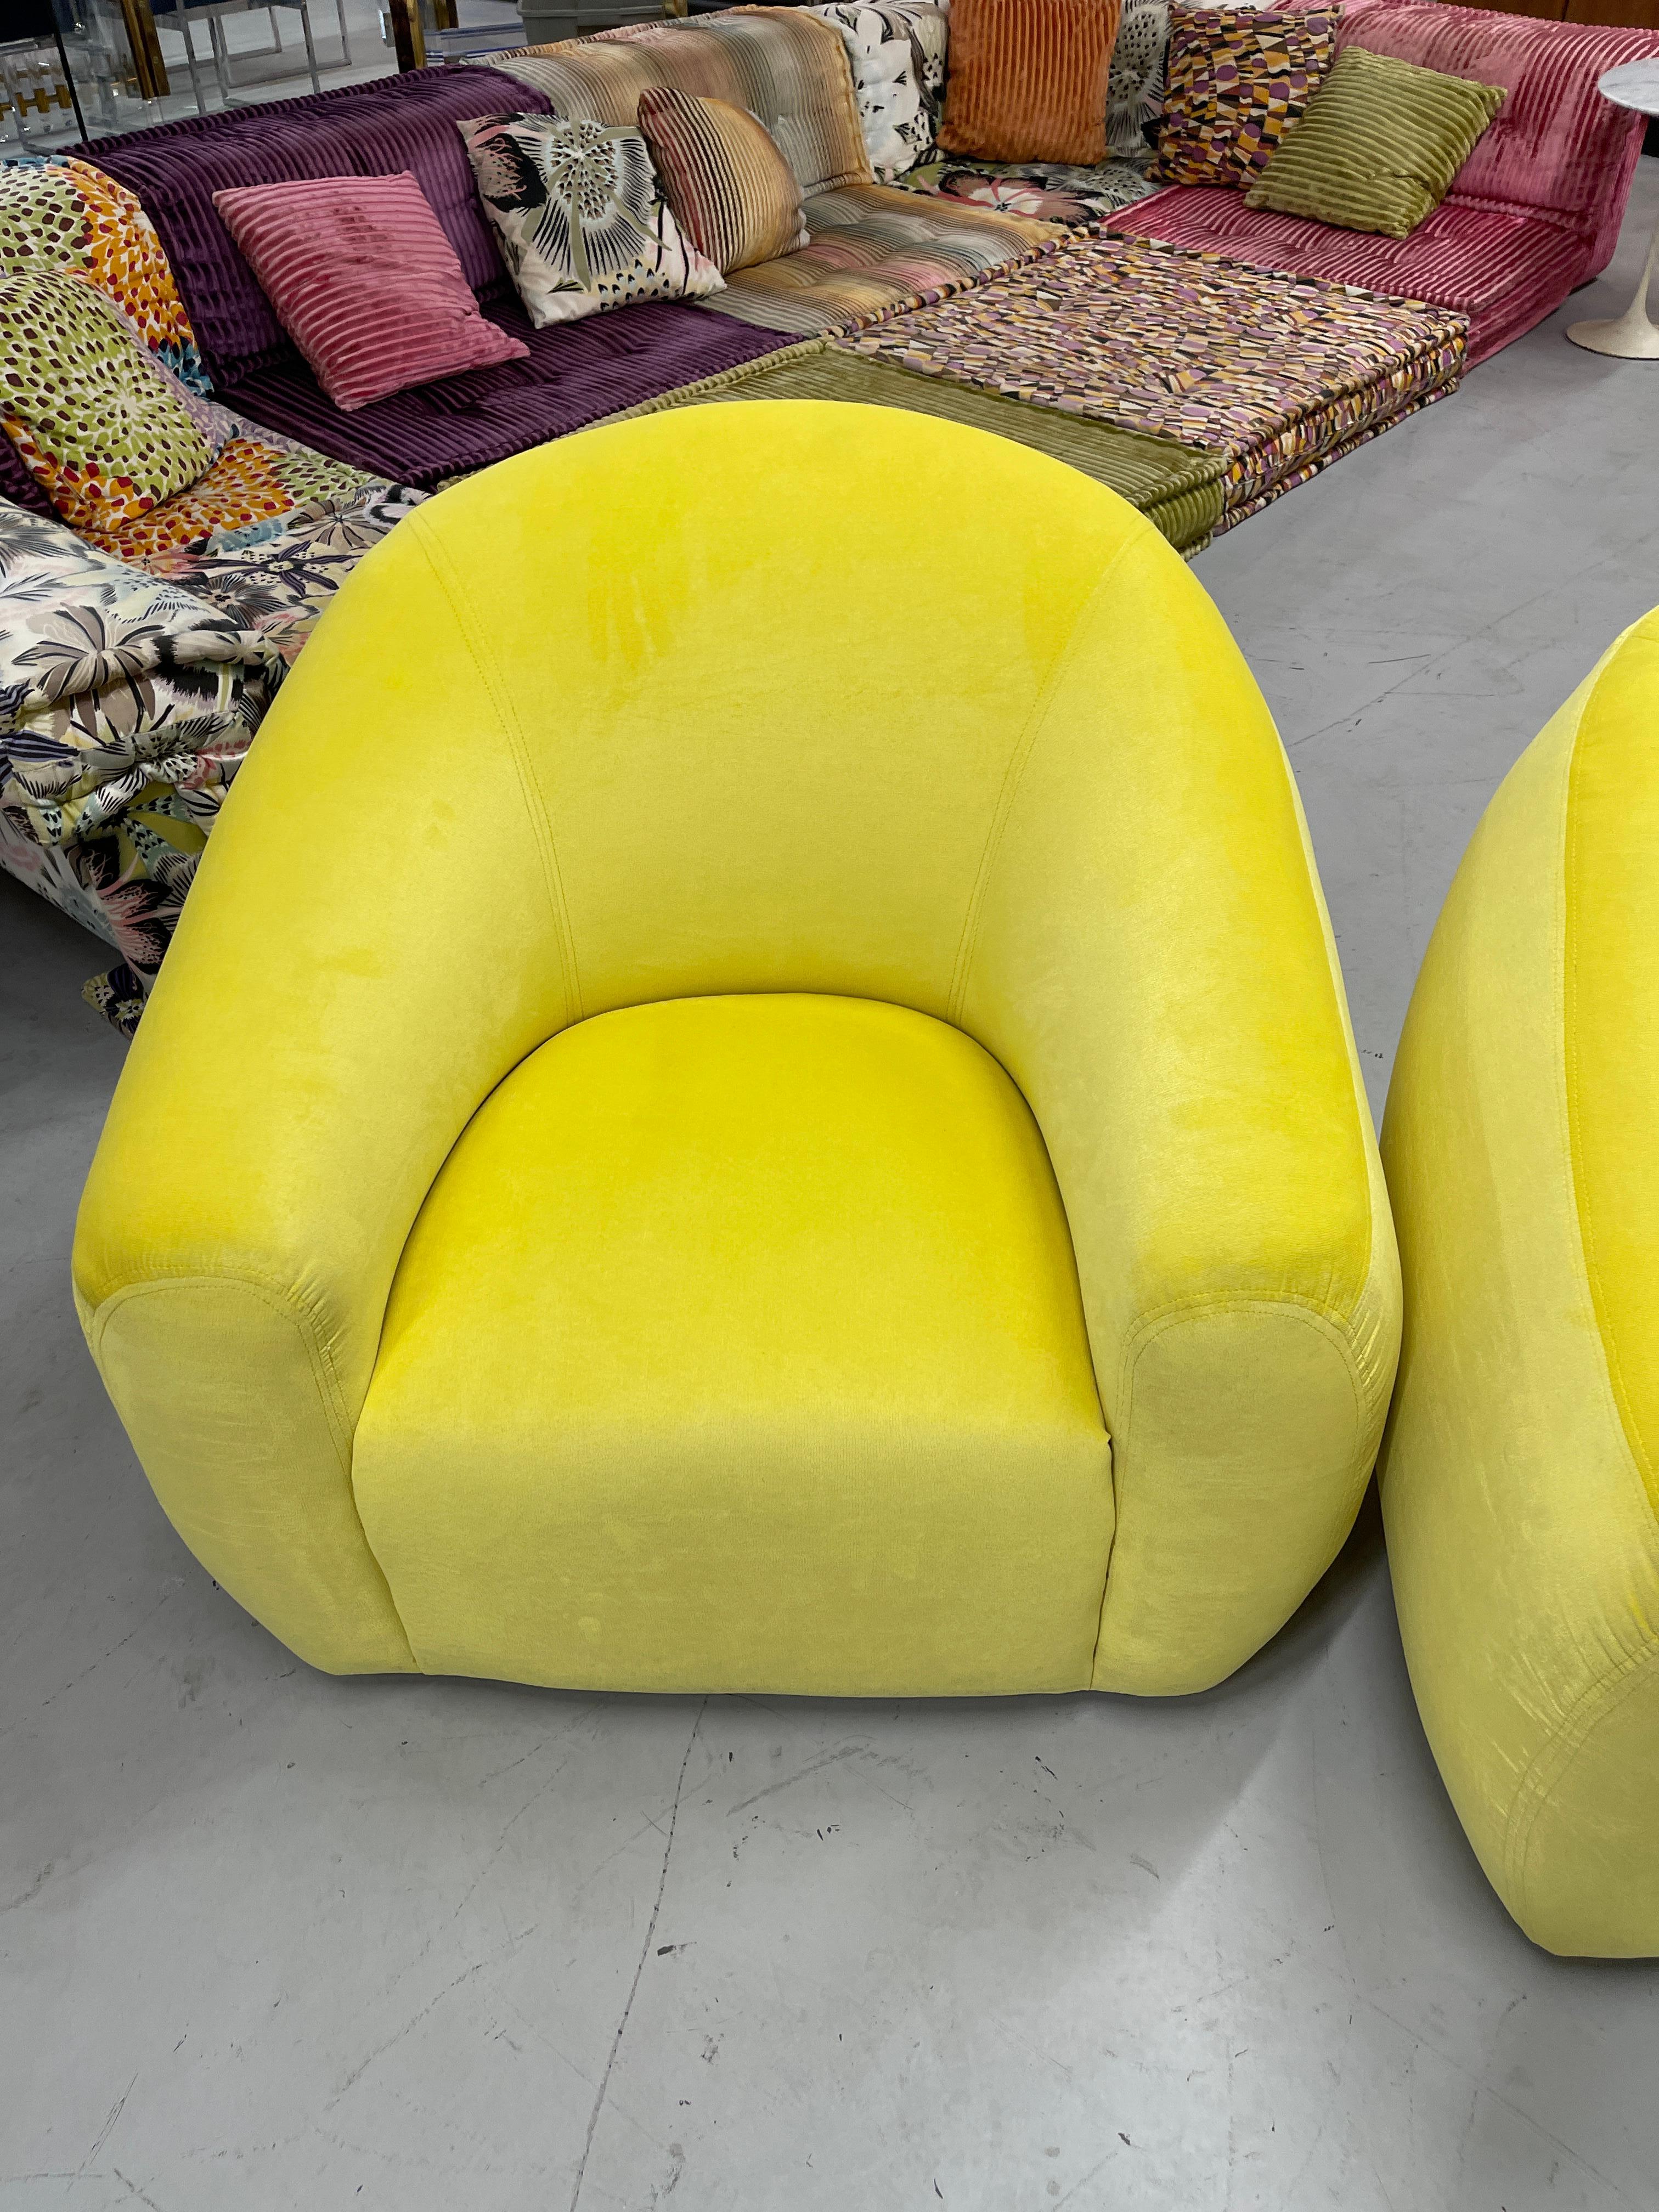 A Rudin Swivel Chairs in Limon Kravet Fabric 7